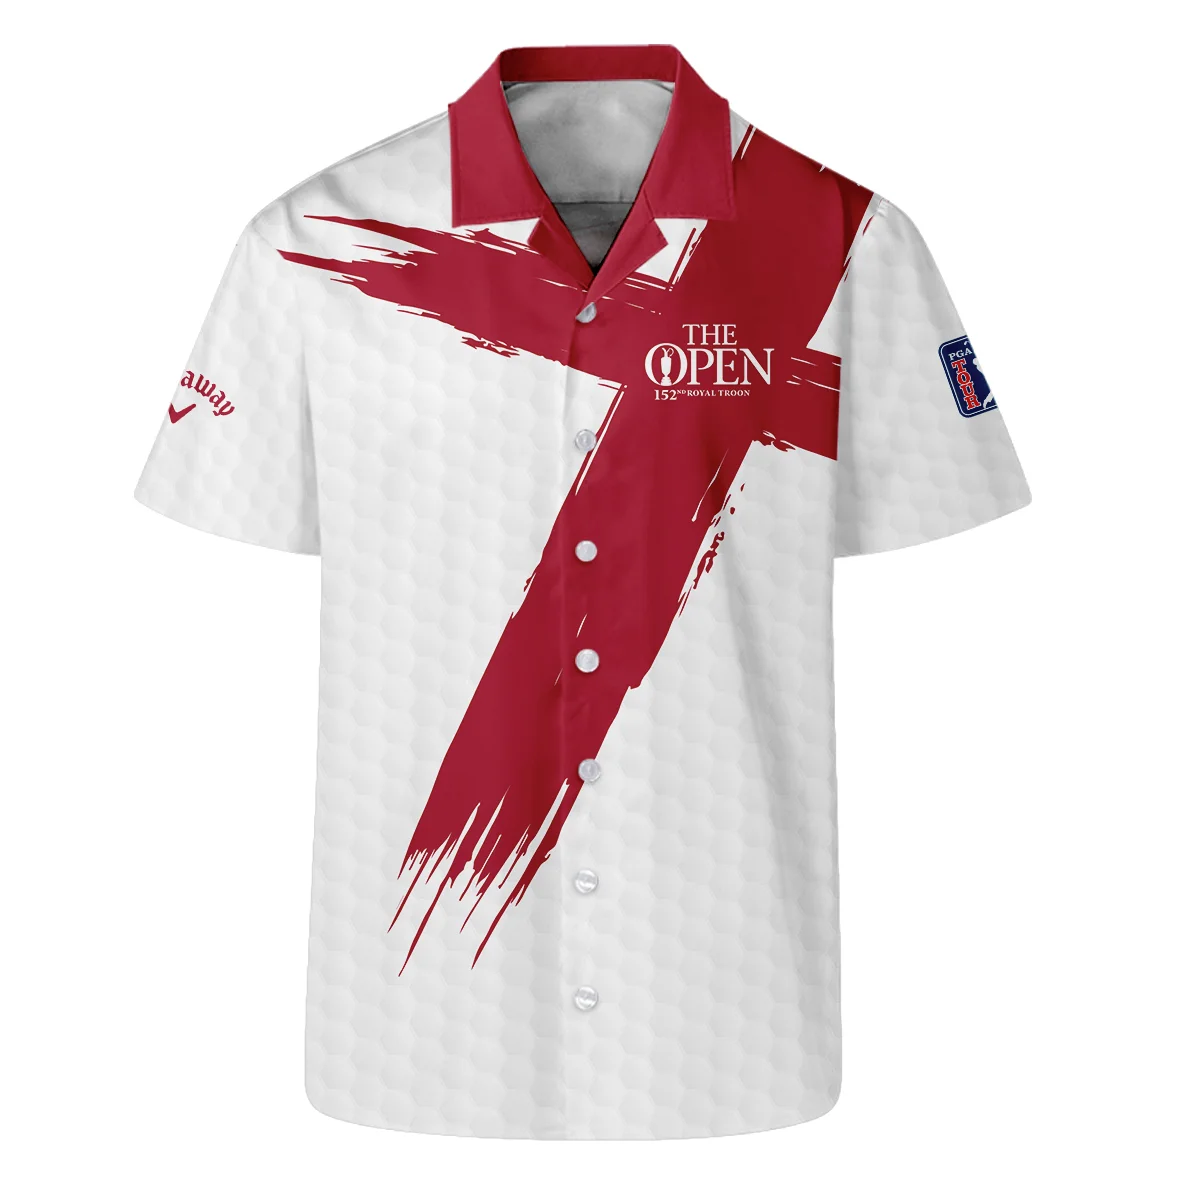 Callaway 152nd The Open Championship Golf Sport Sleeveless Jacket Red White Golf Pattern All Over Print Sleeveless Jacket